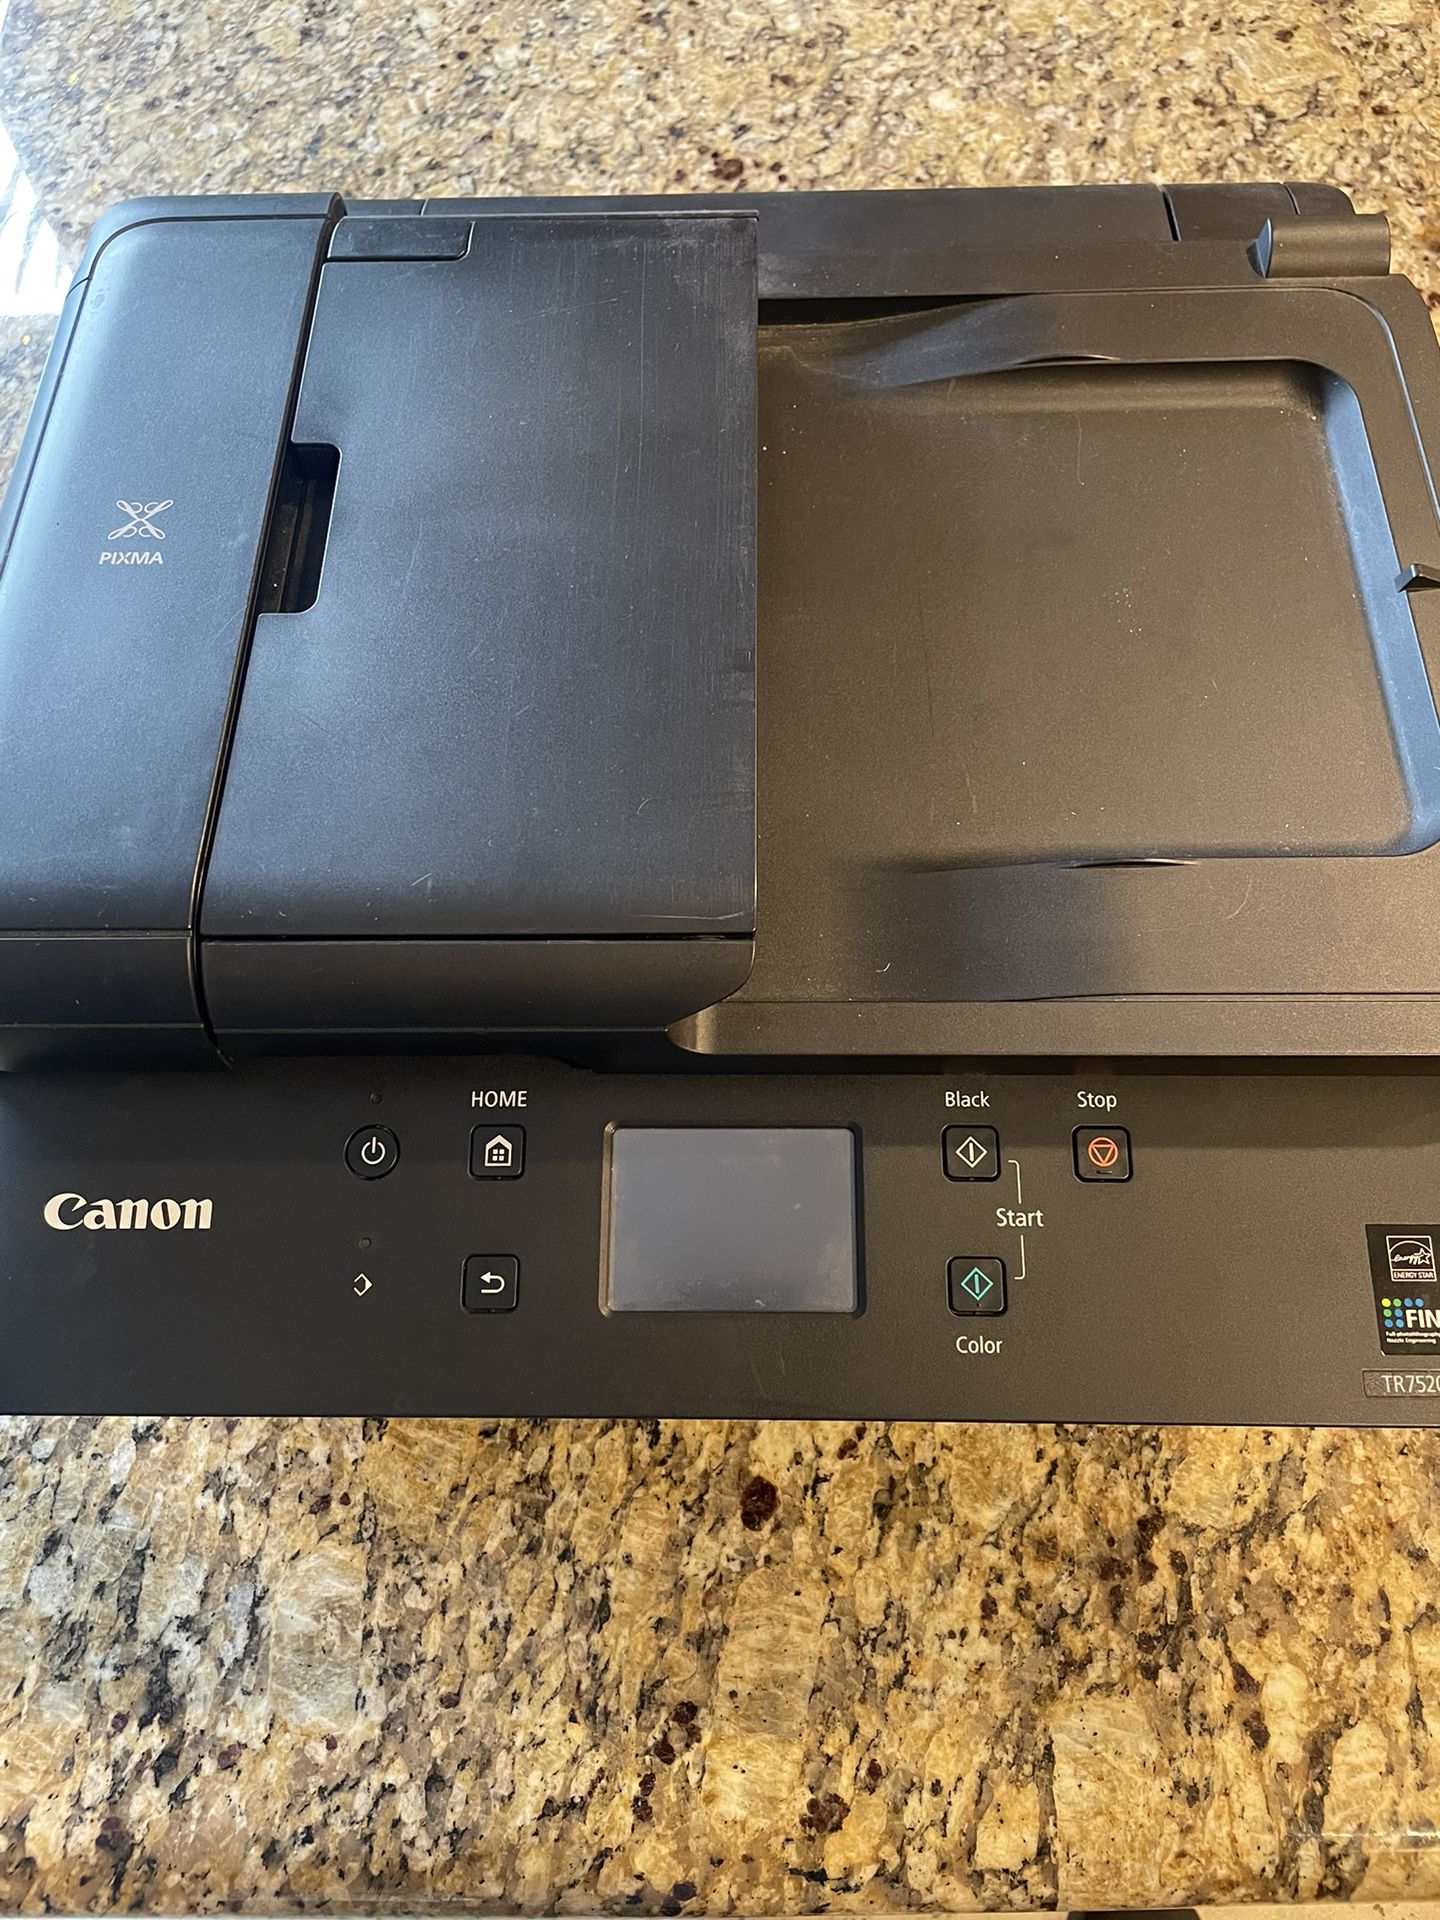 Canon PIXMA TR7520 Wireless Home Office All-in-One Inkjet Printer (Black  for Sale in Huntington Beach, CA OfferUp